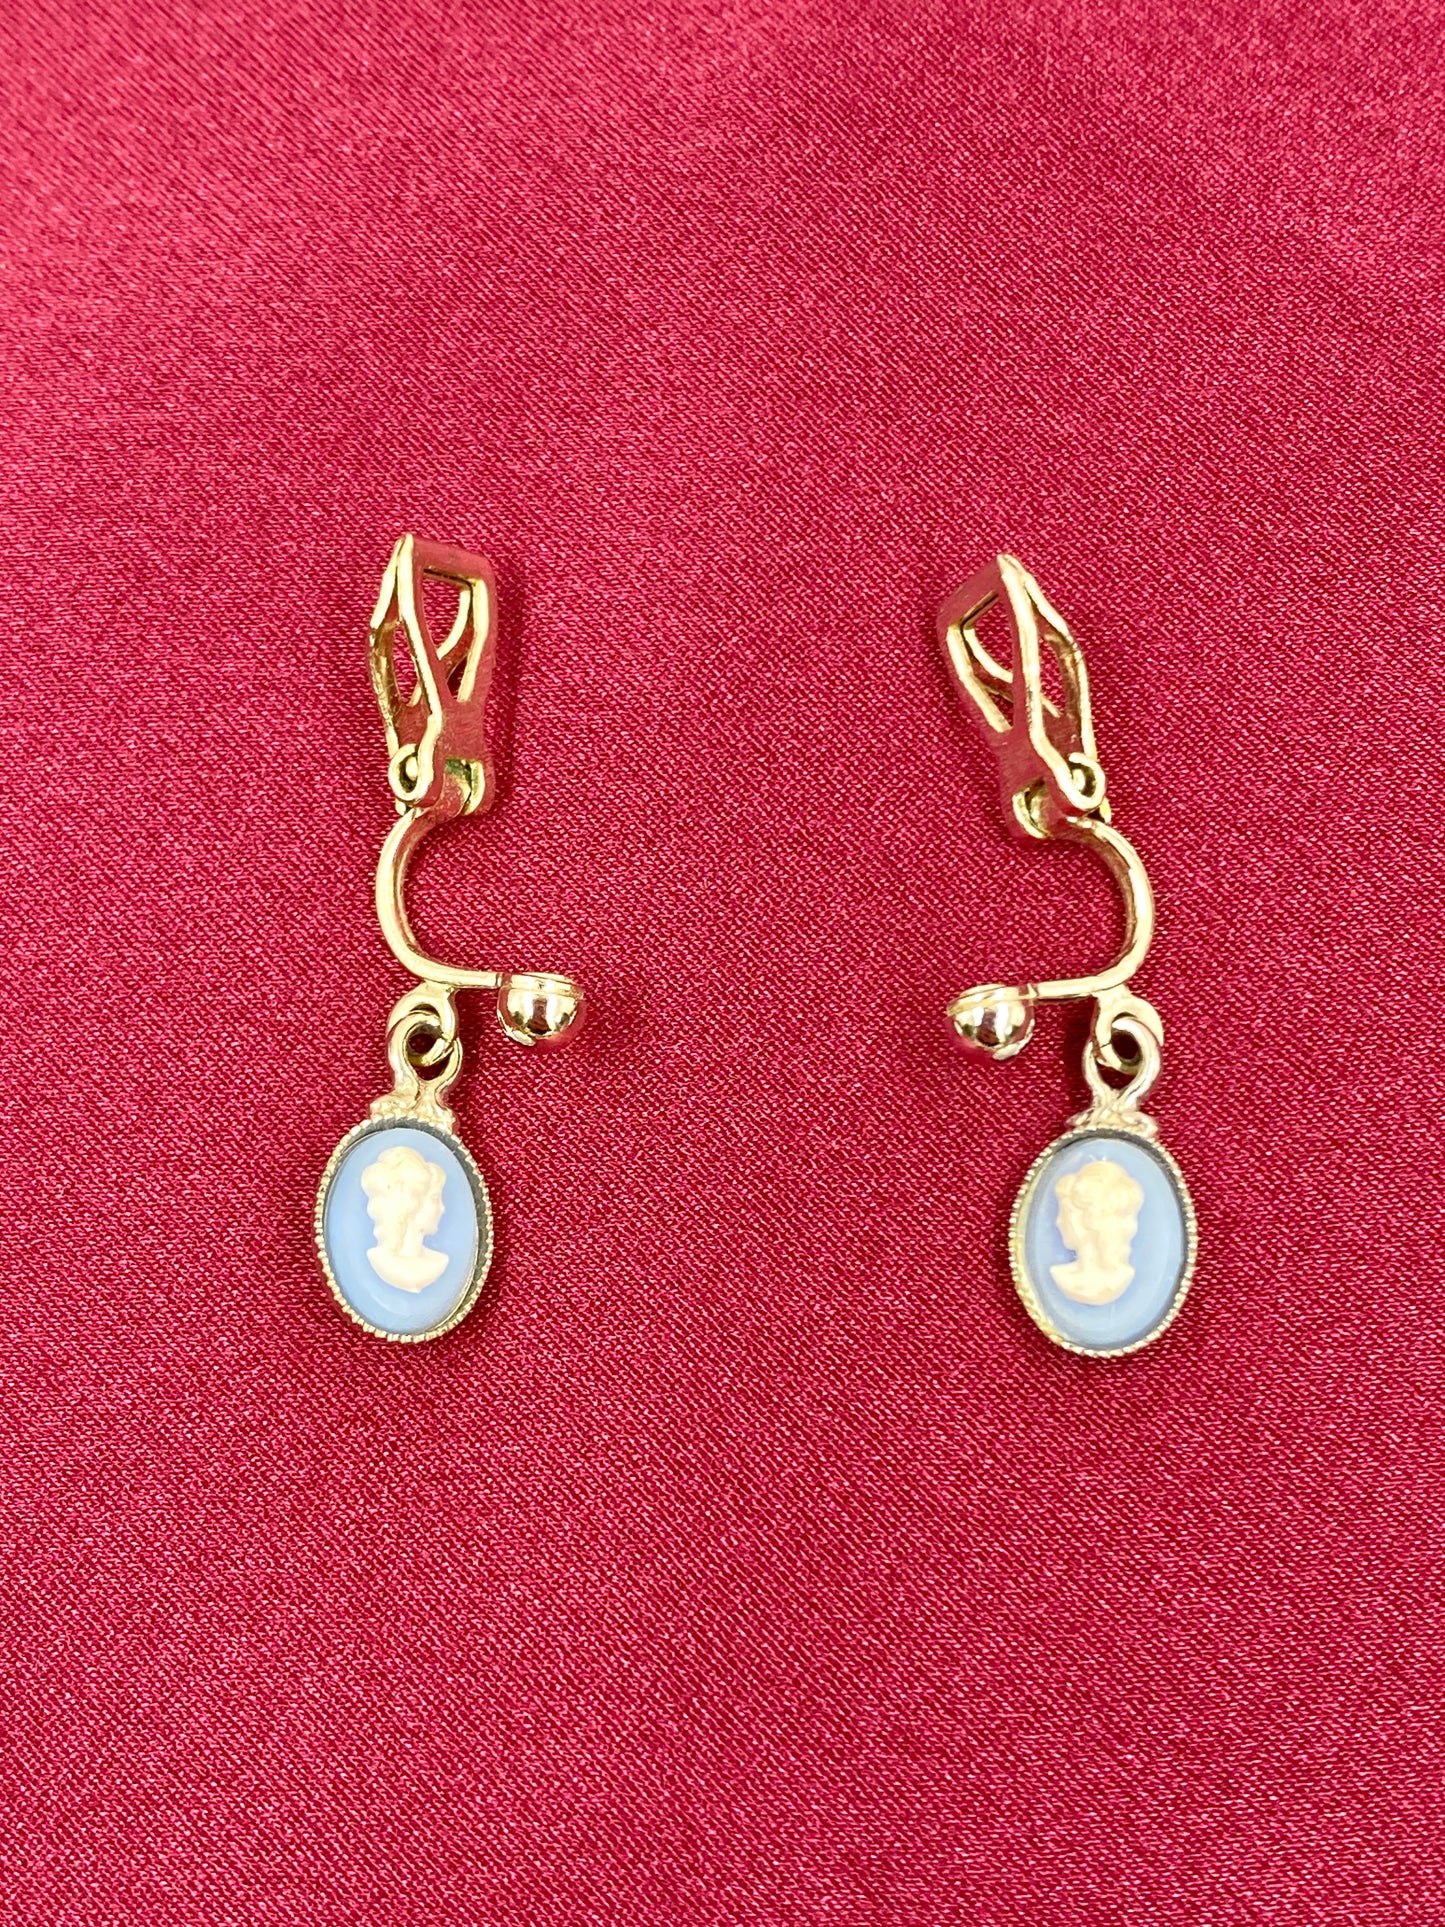 Vintage Clip-On Blue Dangling Cameo Earrings